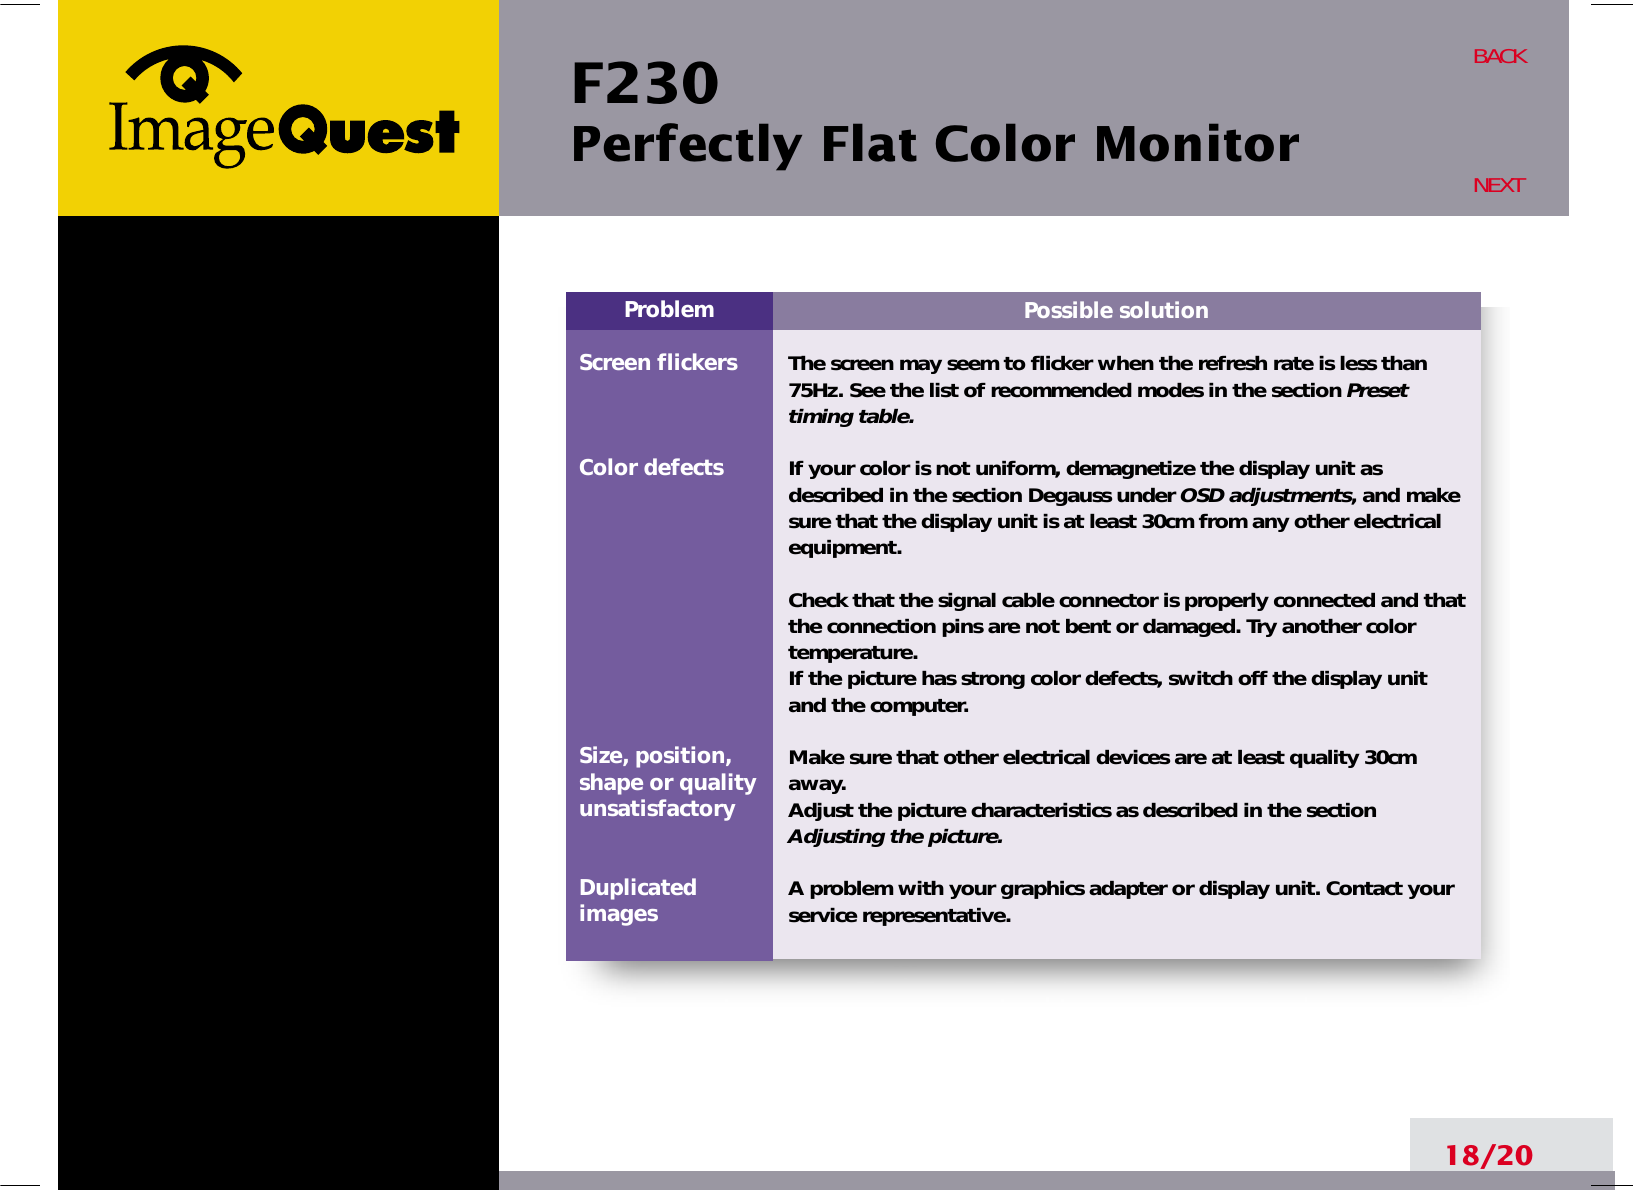 F230 Perfectly Flat Color Monitor18/20BACKNEXTPossible solutionThe screen may seem to flicker when the refresh rate is less than75Hz. See the list of recommended modes in the section Presettiming table.If your color is not uniform, demagnetize the display unit asdescribed in the section Degauss under OSD adjustments, and makesure that the display unit is at least 30cm from any other electricalequipment.Check that the signal cable connector is properly connected and thatthe connection pins are not bent or damaged. Try another colortemperature. If the picture has strong color defects, switch off the display unitand the computer.Make sure that other electrical devices are at least quality 30cmaway.Adjust the picture characteristics as described in the sectionAdjusting the picture.A problem with your graphics adapter or display unit. Contact yourservice representative.ProblemScreen flickersColor defectsSize, position,shape or qualityunsatisfactoryDuplicatedimages